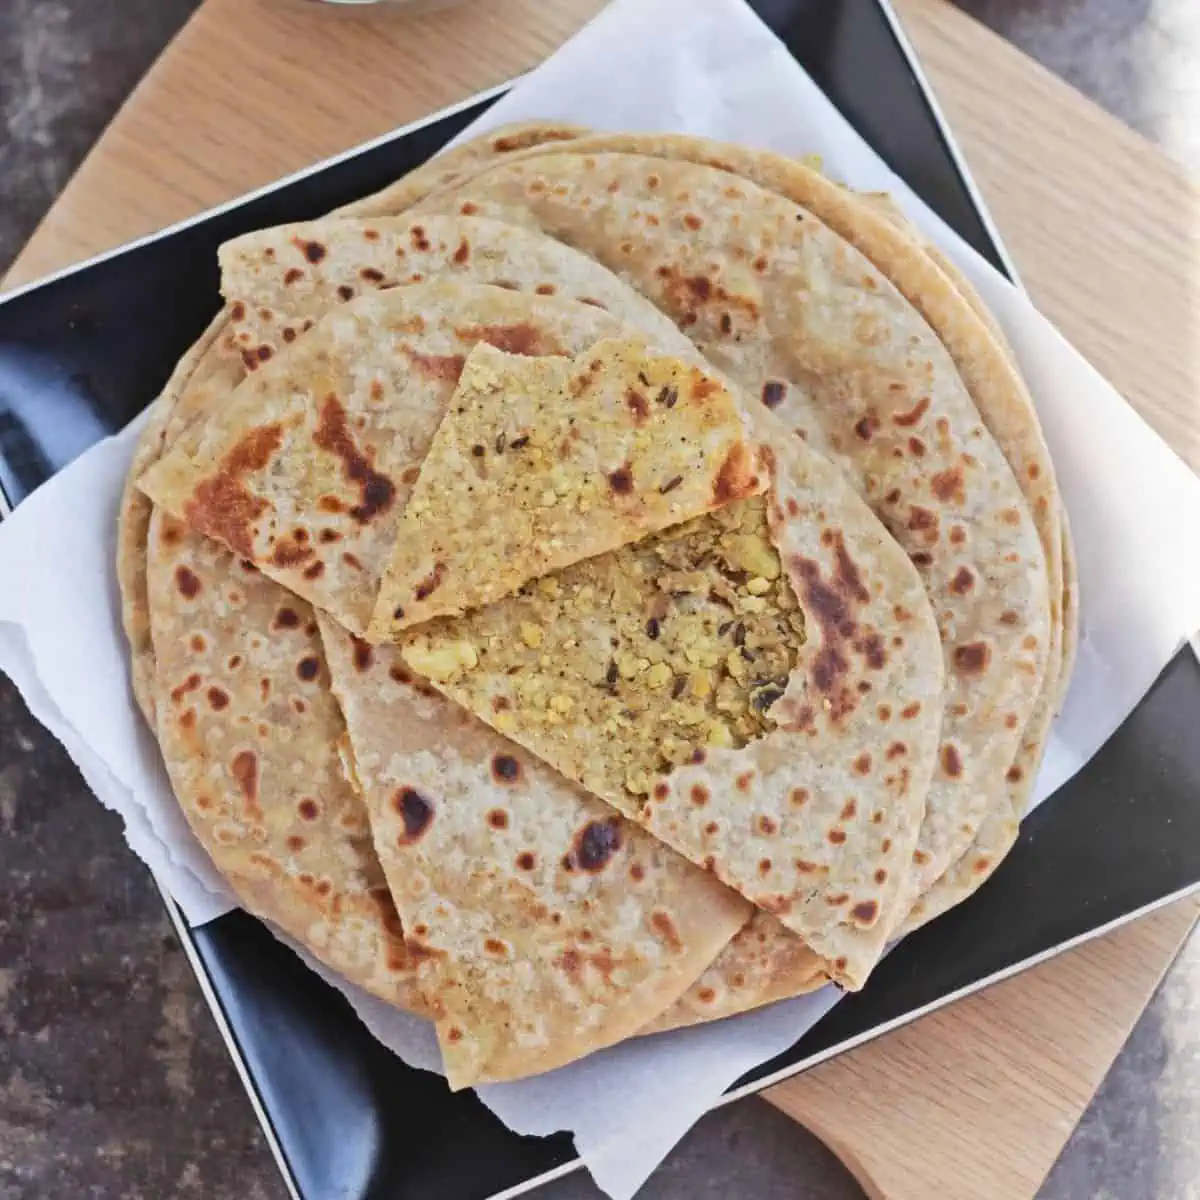 Top view of chana dal paratha showing the filling.